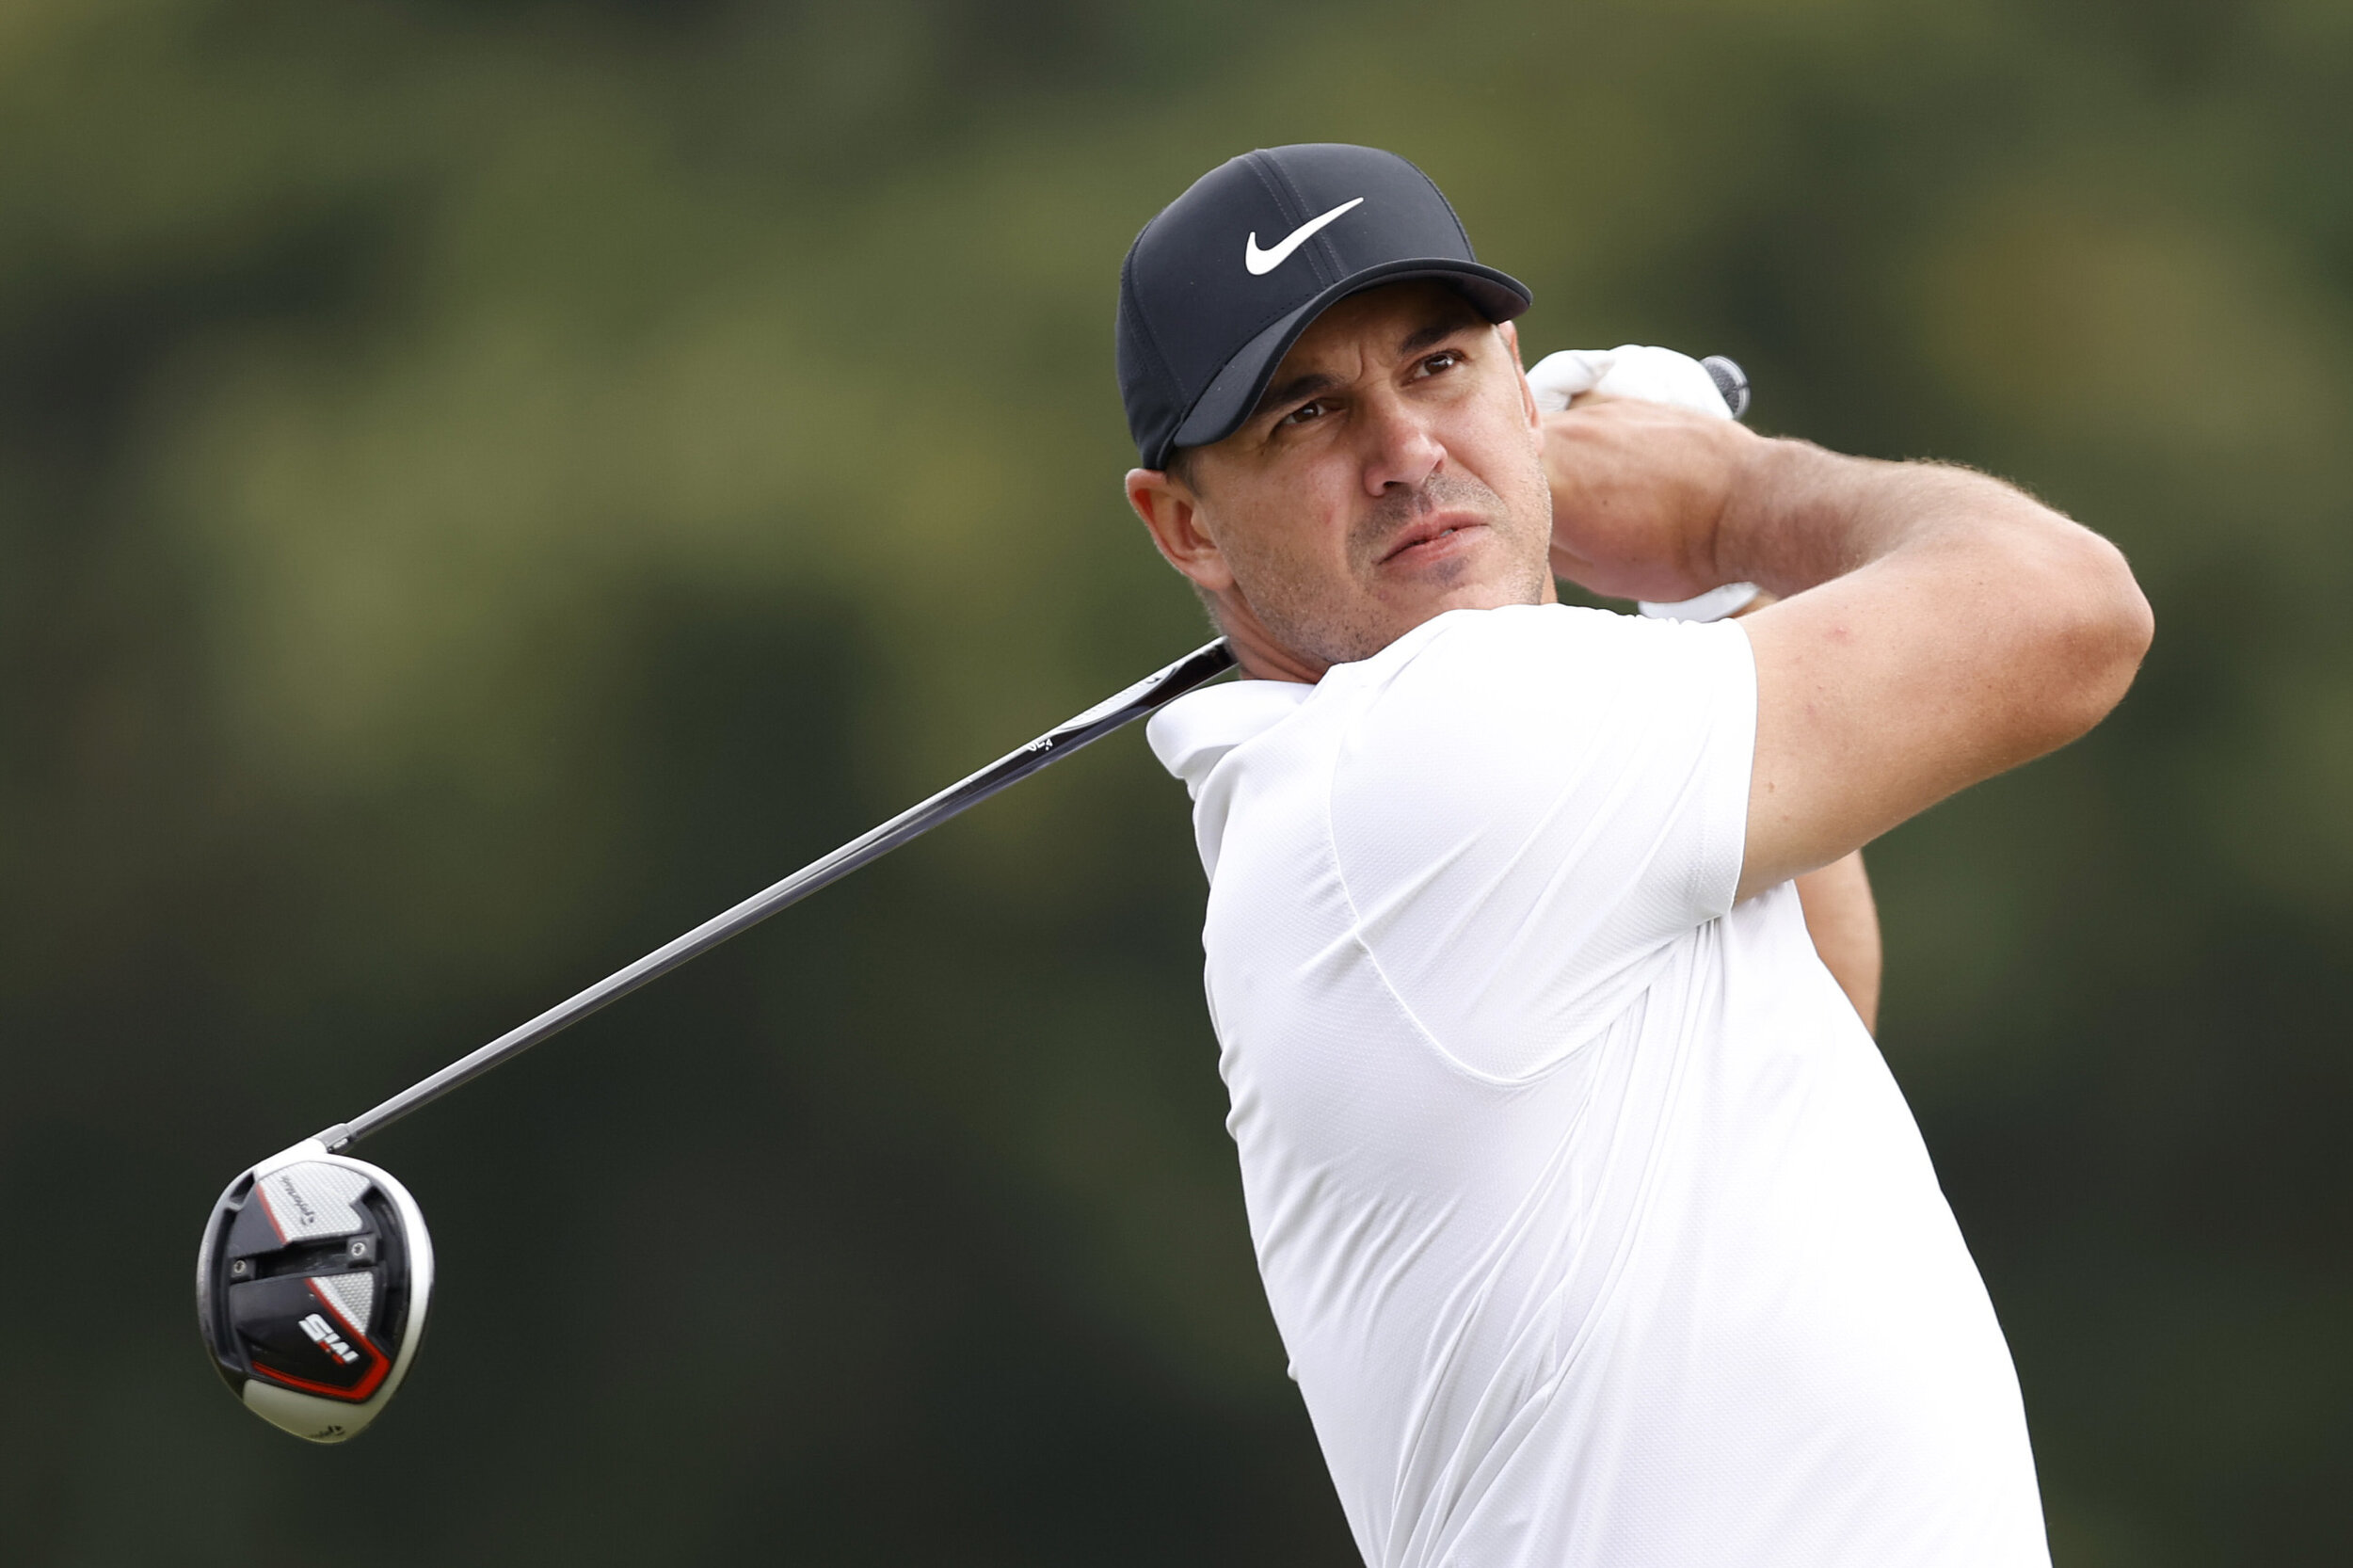  HOUSTON, TEXAS - NOVEMBER 08: Brooks Koepka of the United States plays his shot from the first tee during the final round of the Houston Open at Memorial Park Golf Course on November 08, 2020 in Houston, Texas. (Photo by Carmen Mandato/Getty Images)